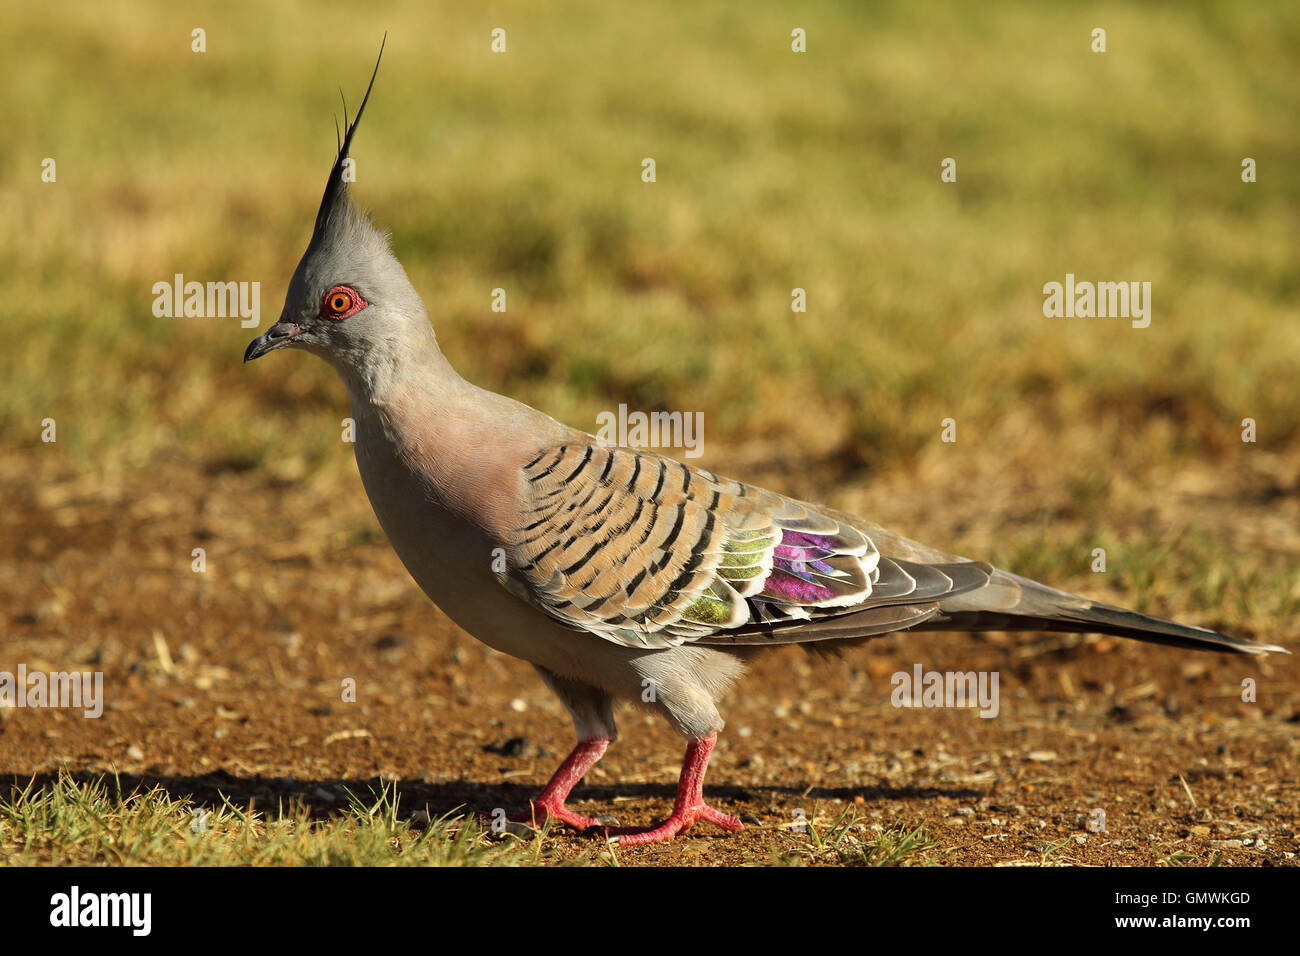 A Crested Pigeon approaching. Stock Photo